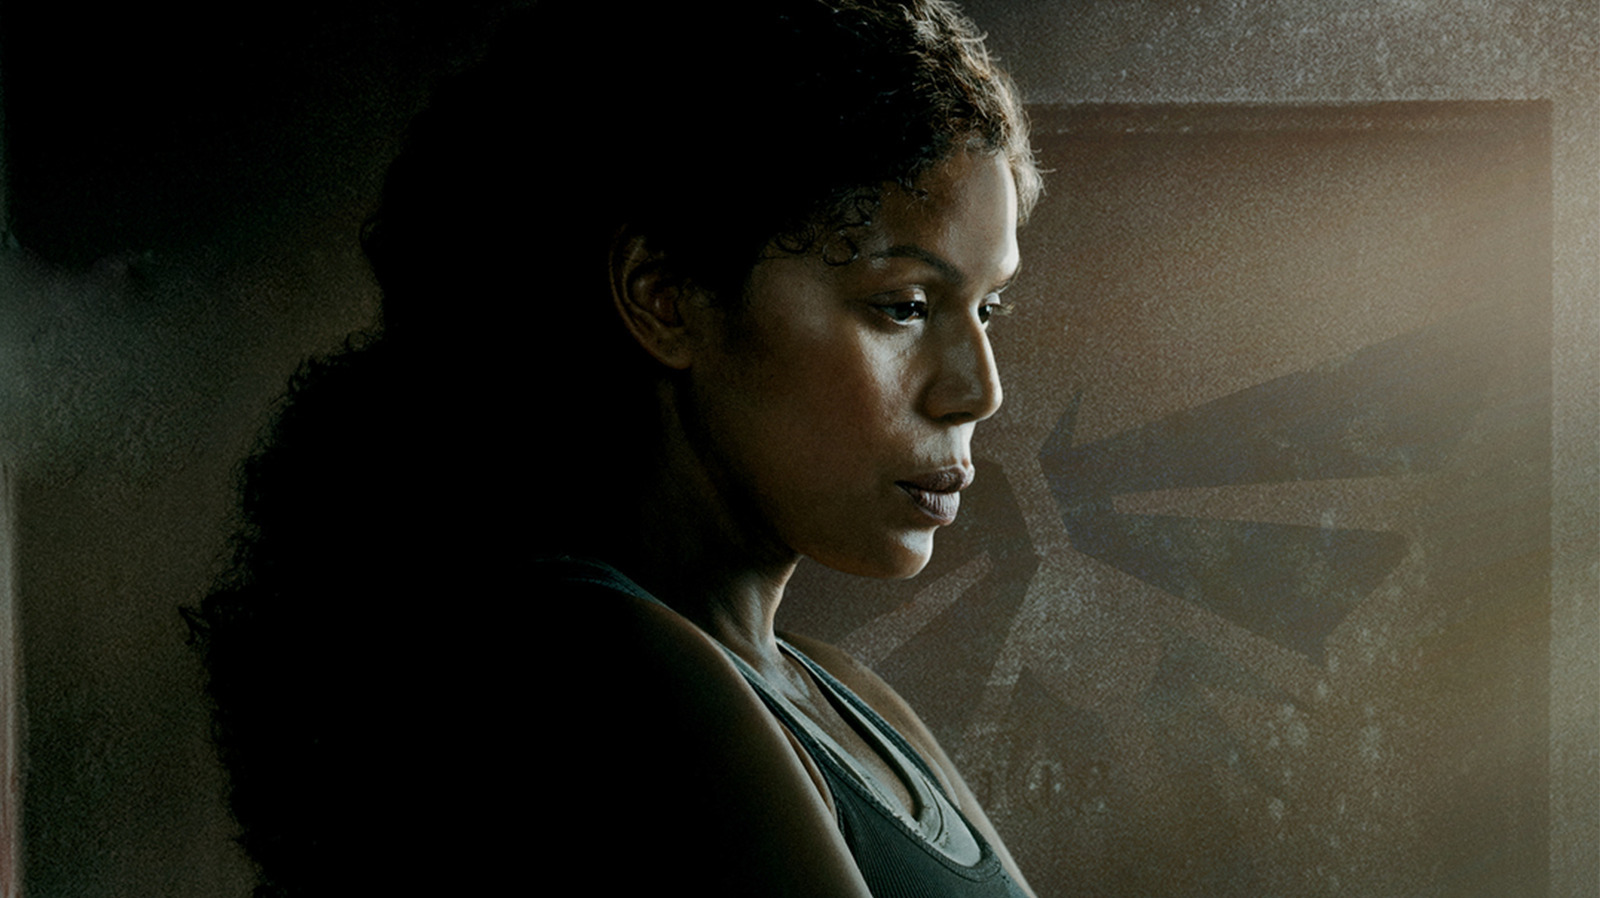 Merle Dandridge revisits The Last of Us ending a decade later